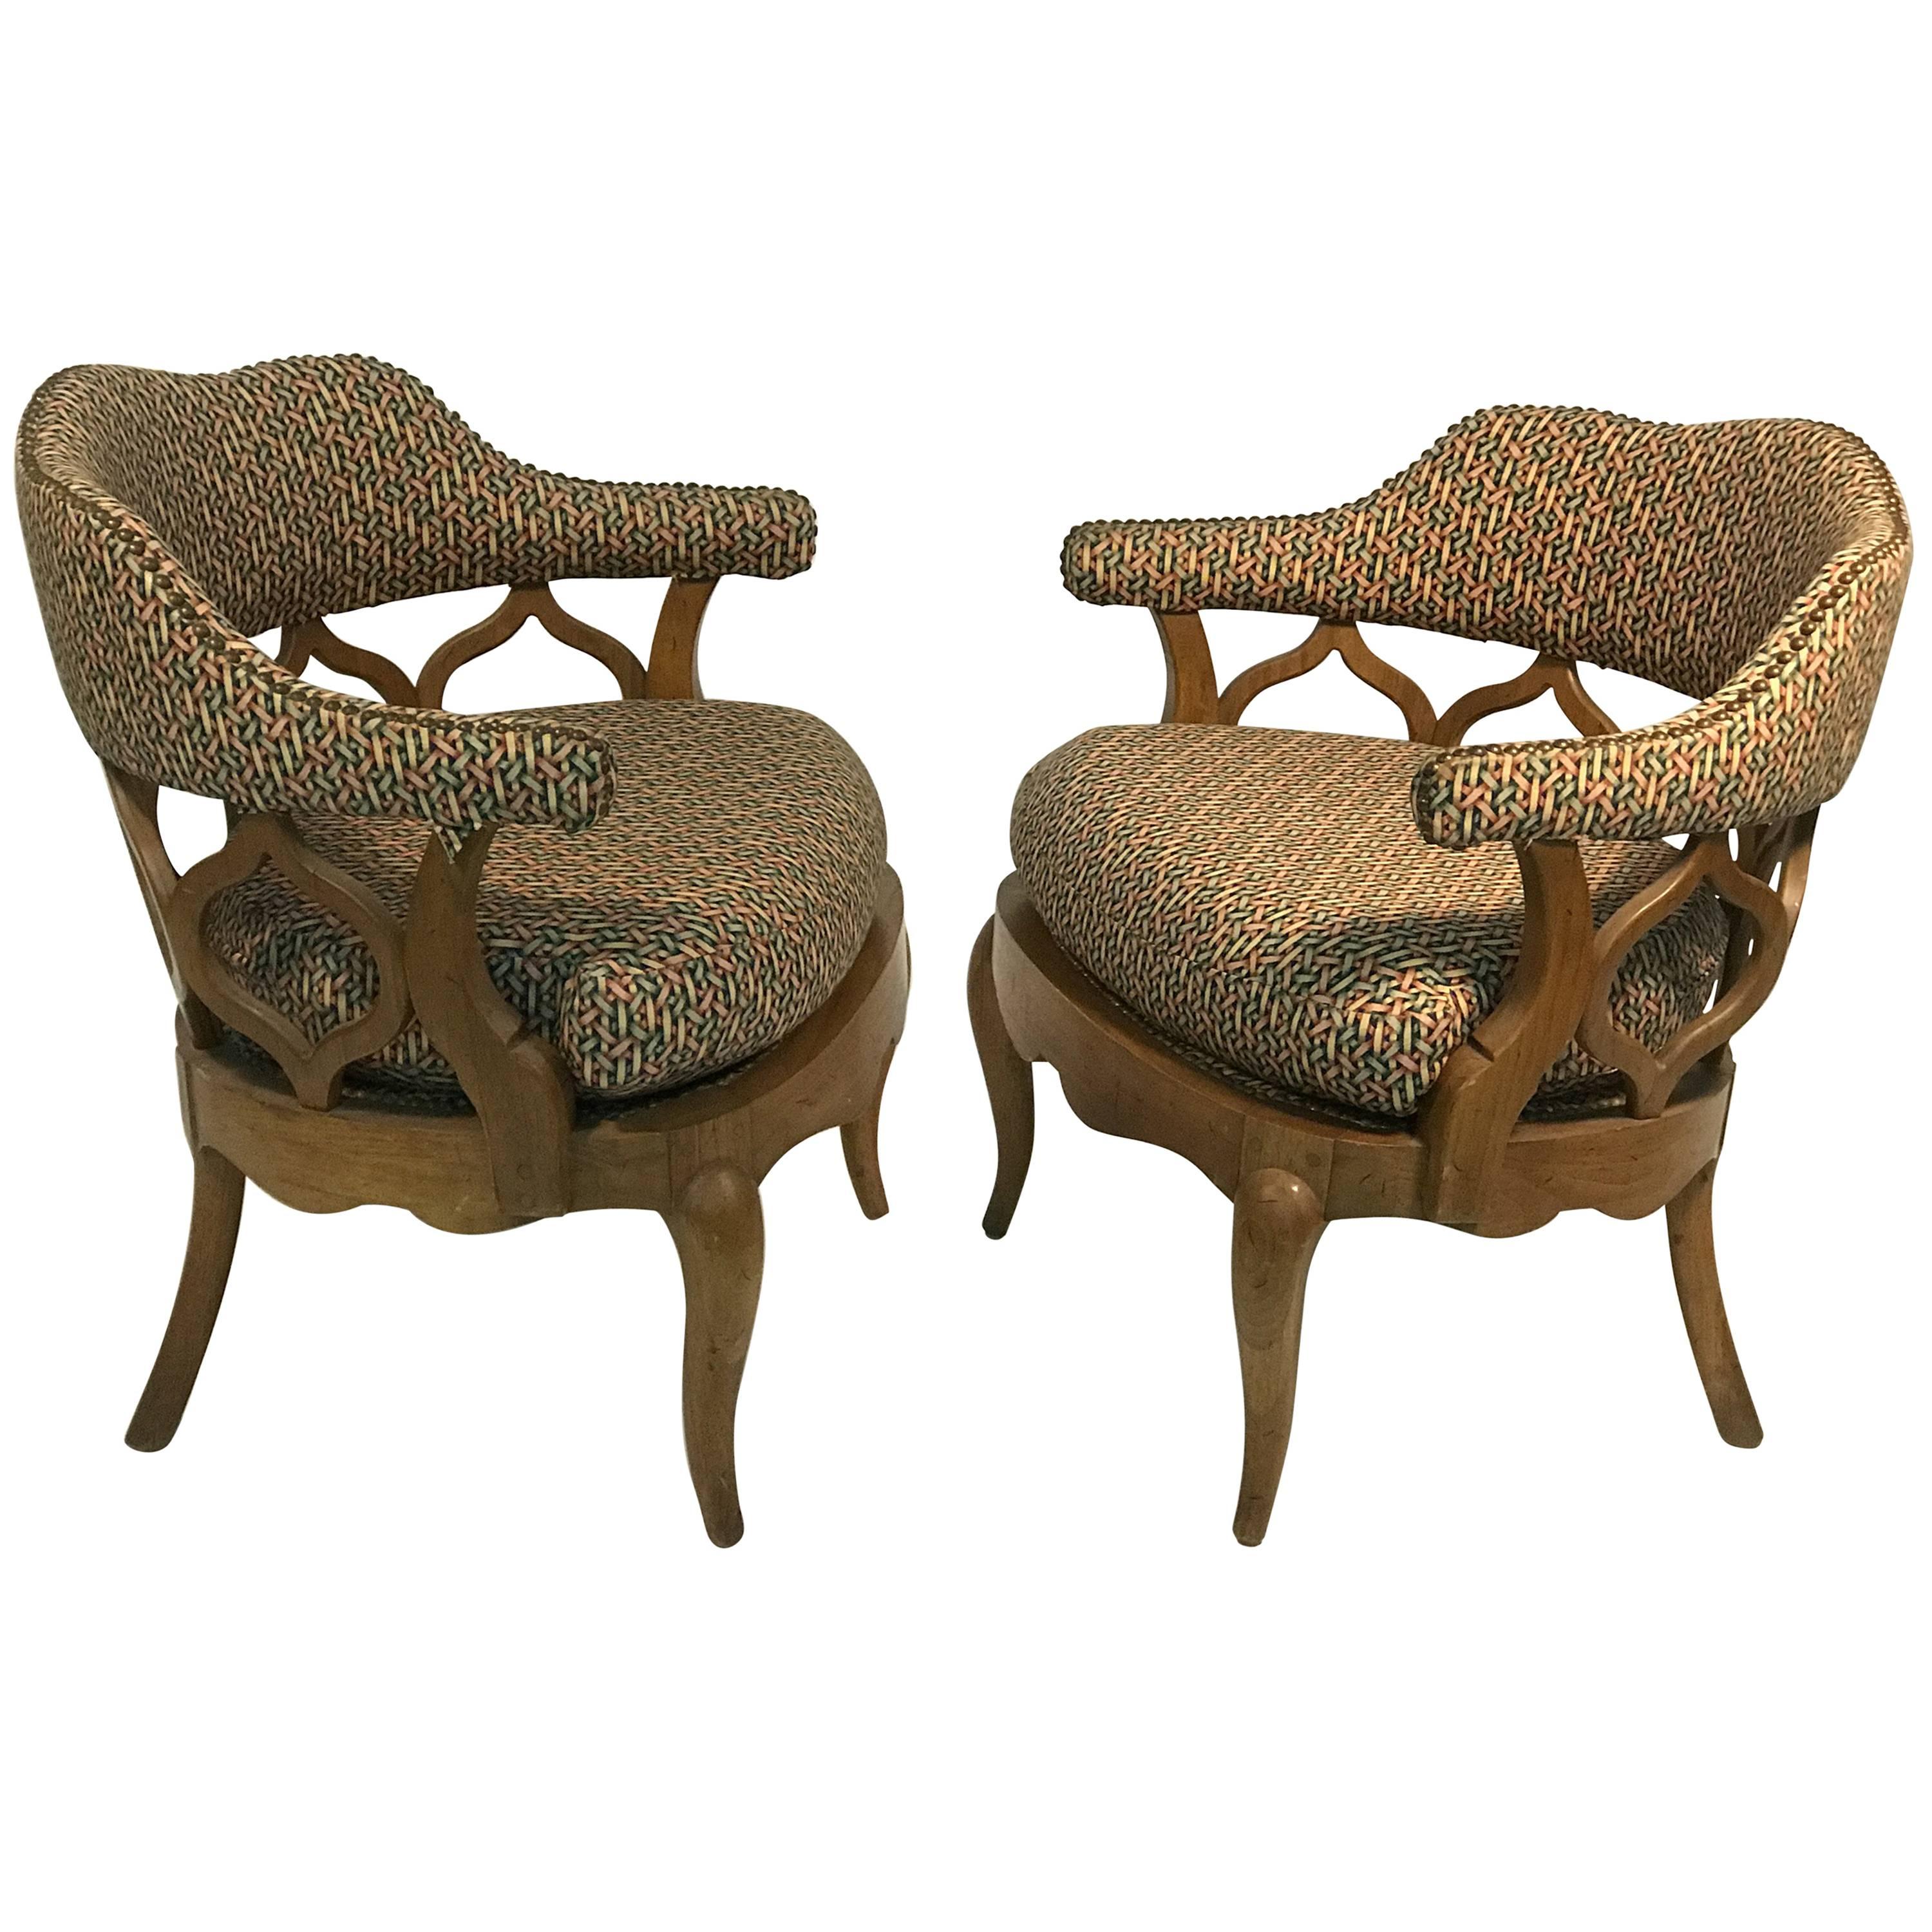 Fabulous Pair of Sculptural Lounge Chairs in the Manner of William Billy Haines For Sale